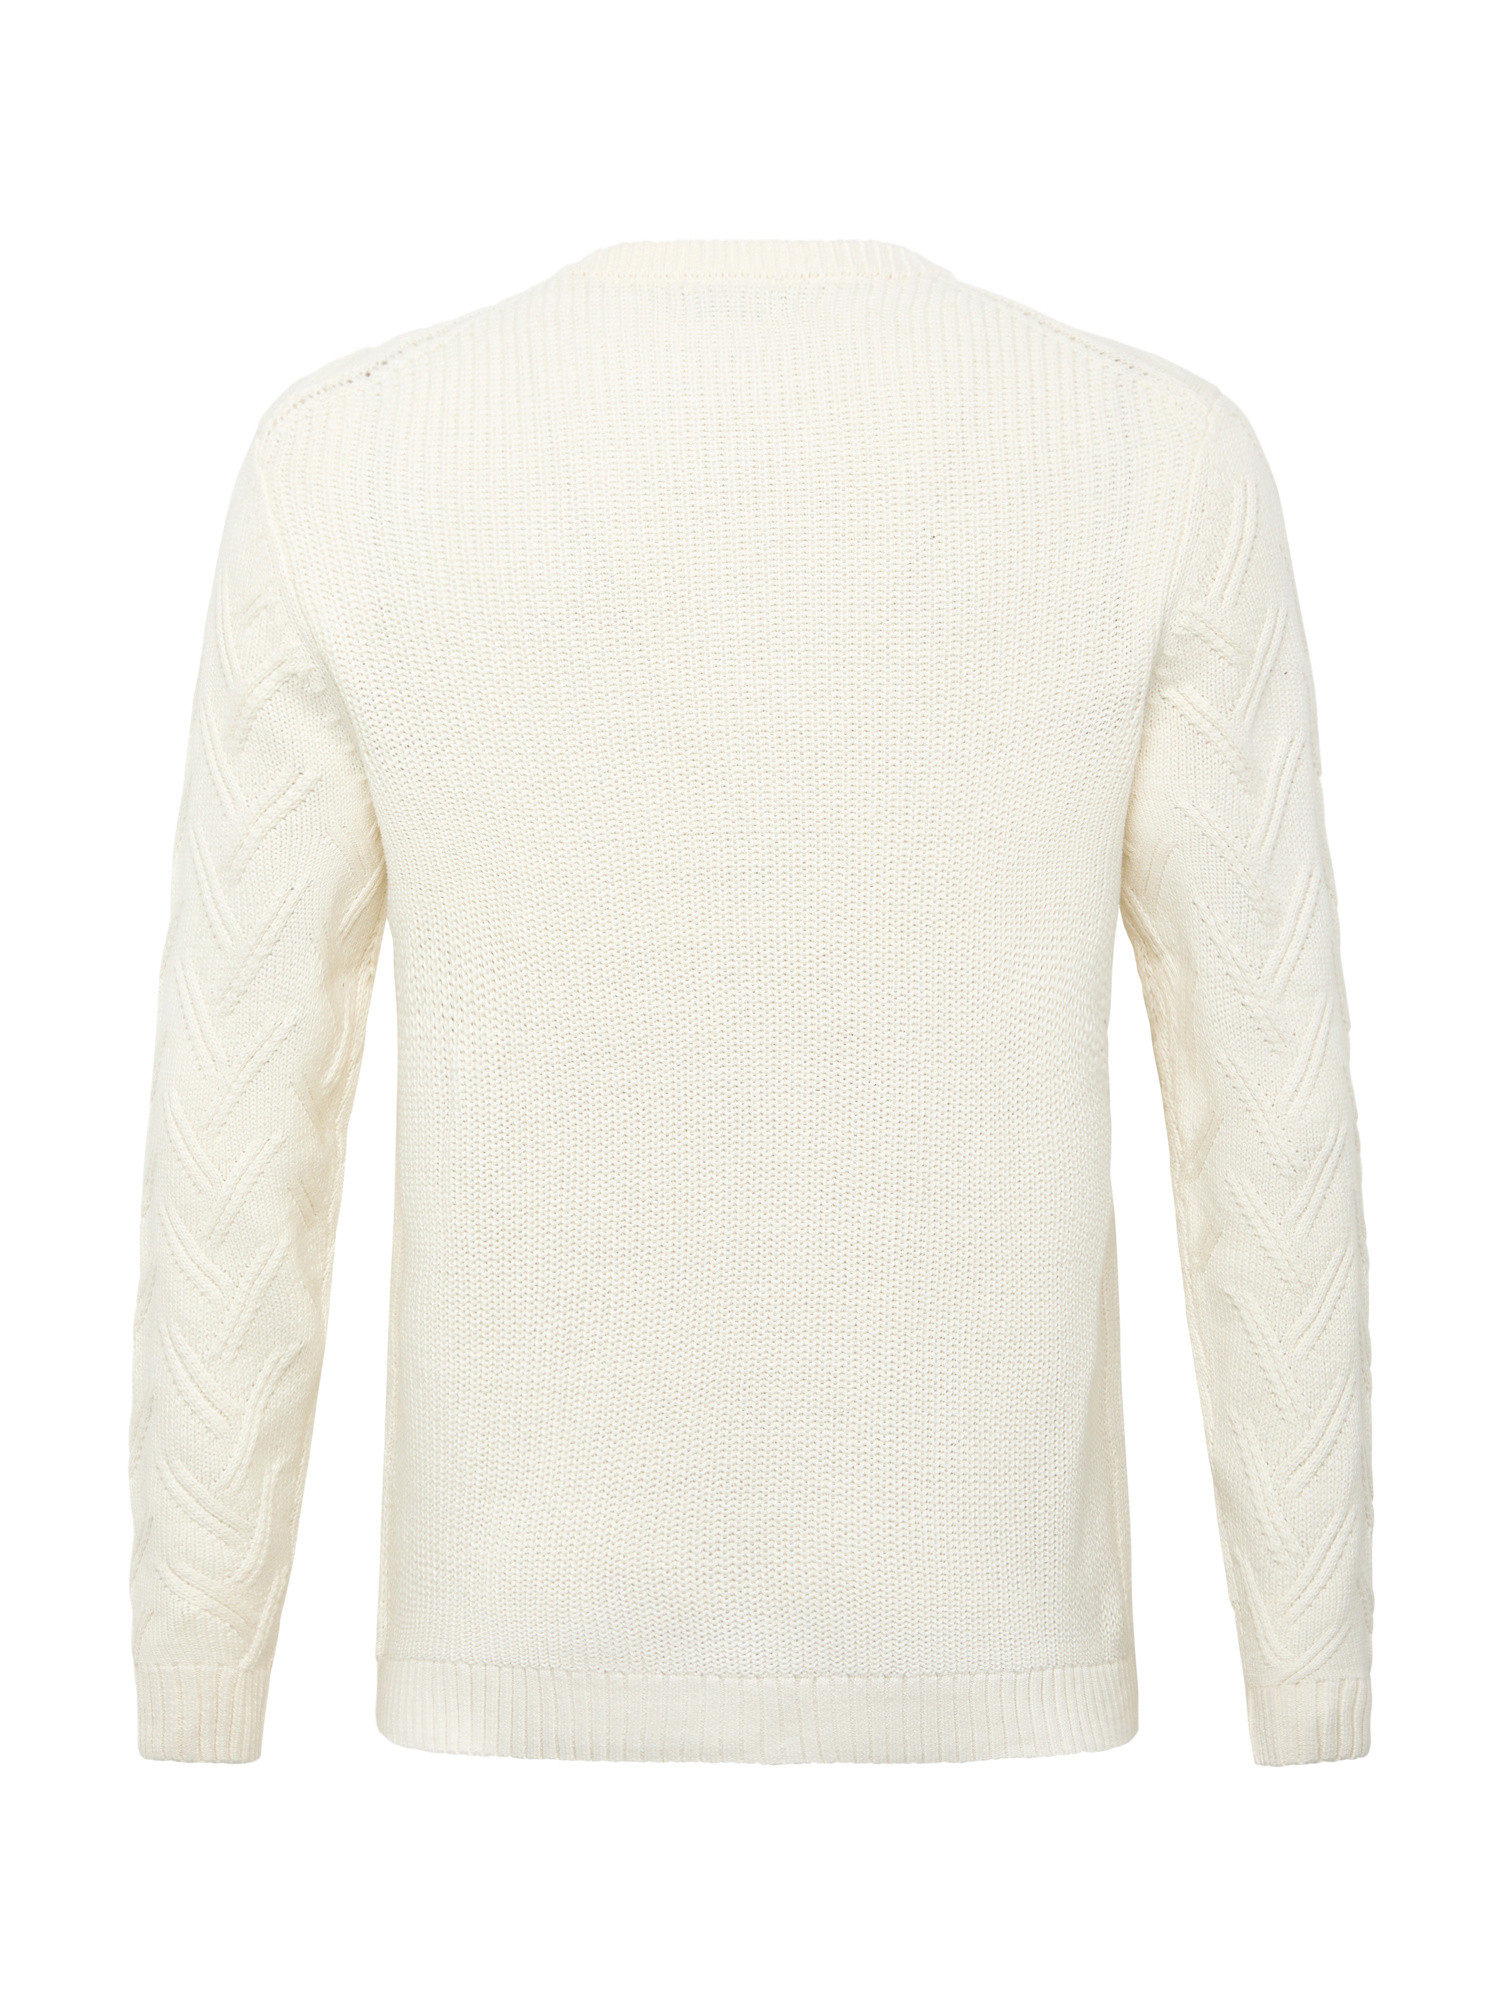 Luca D'Altieri - Crew-neck sweater in cotton blend with lozenges, White, large image number 1